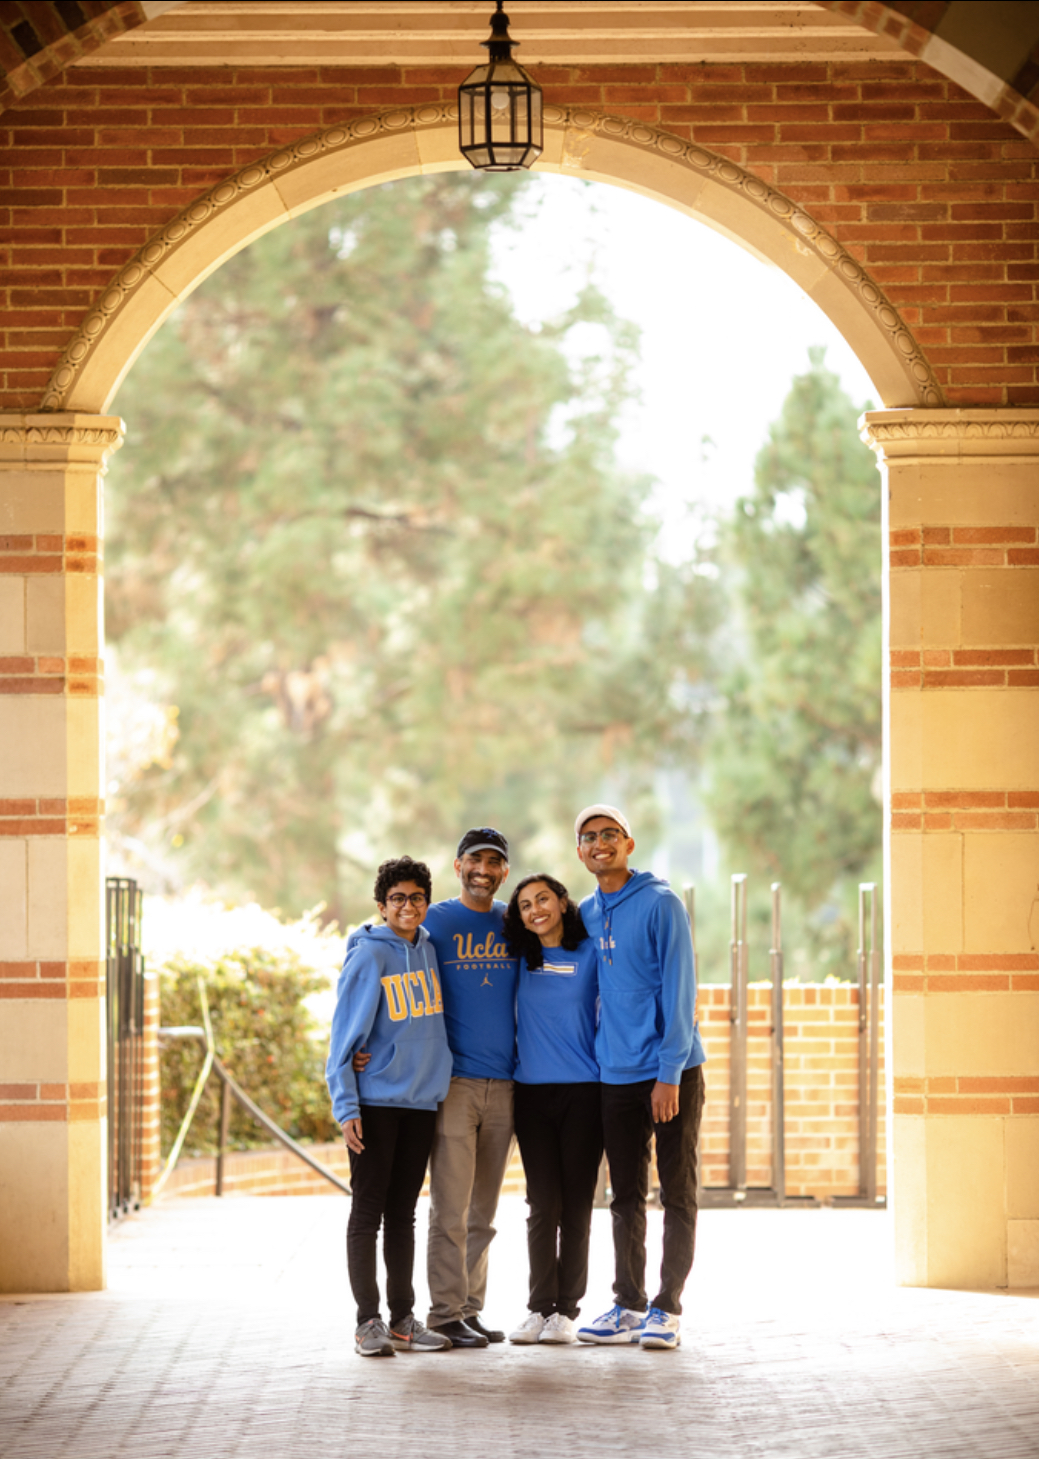 The Agarwal family poses in a UCLA academic building